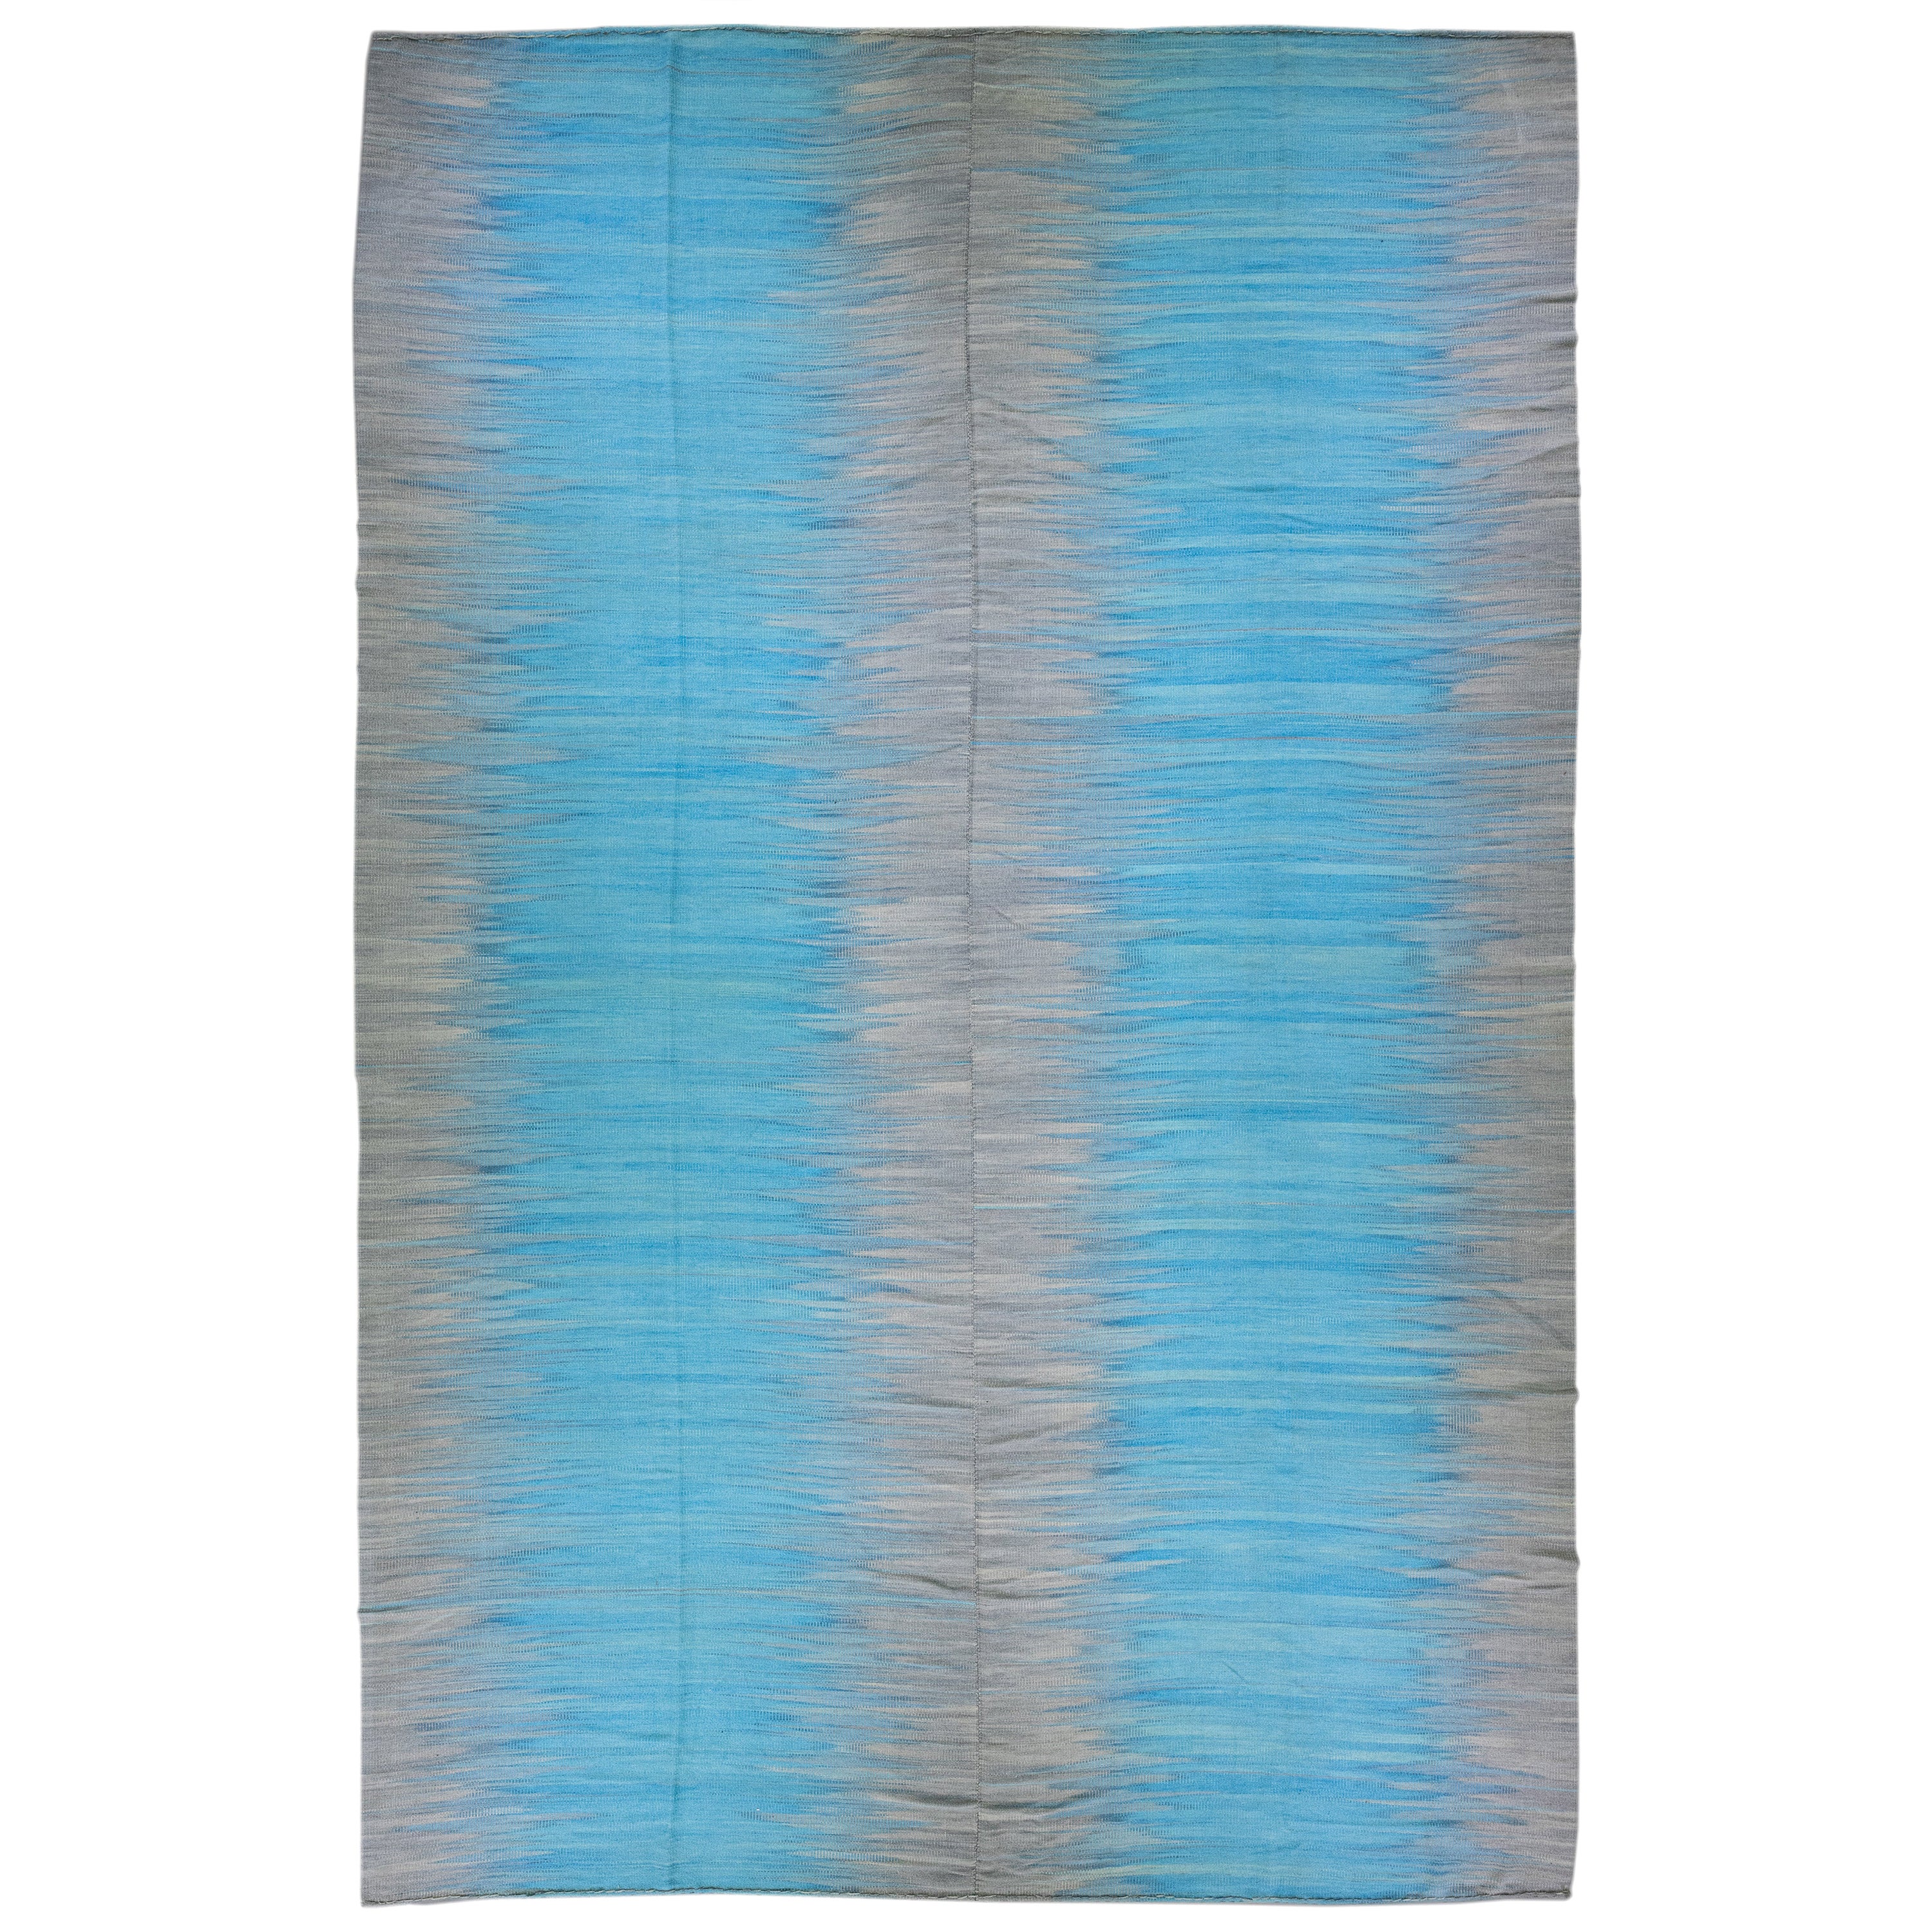 Modern Kilim Flatweave Blue and Gray Abstract Motif Oversize Wool Rug